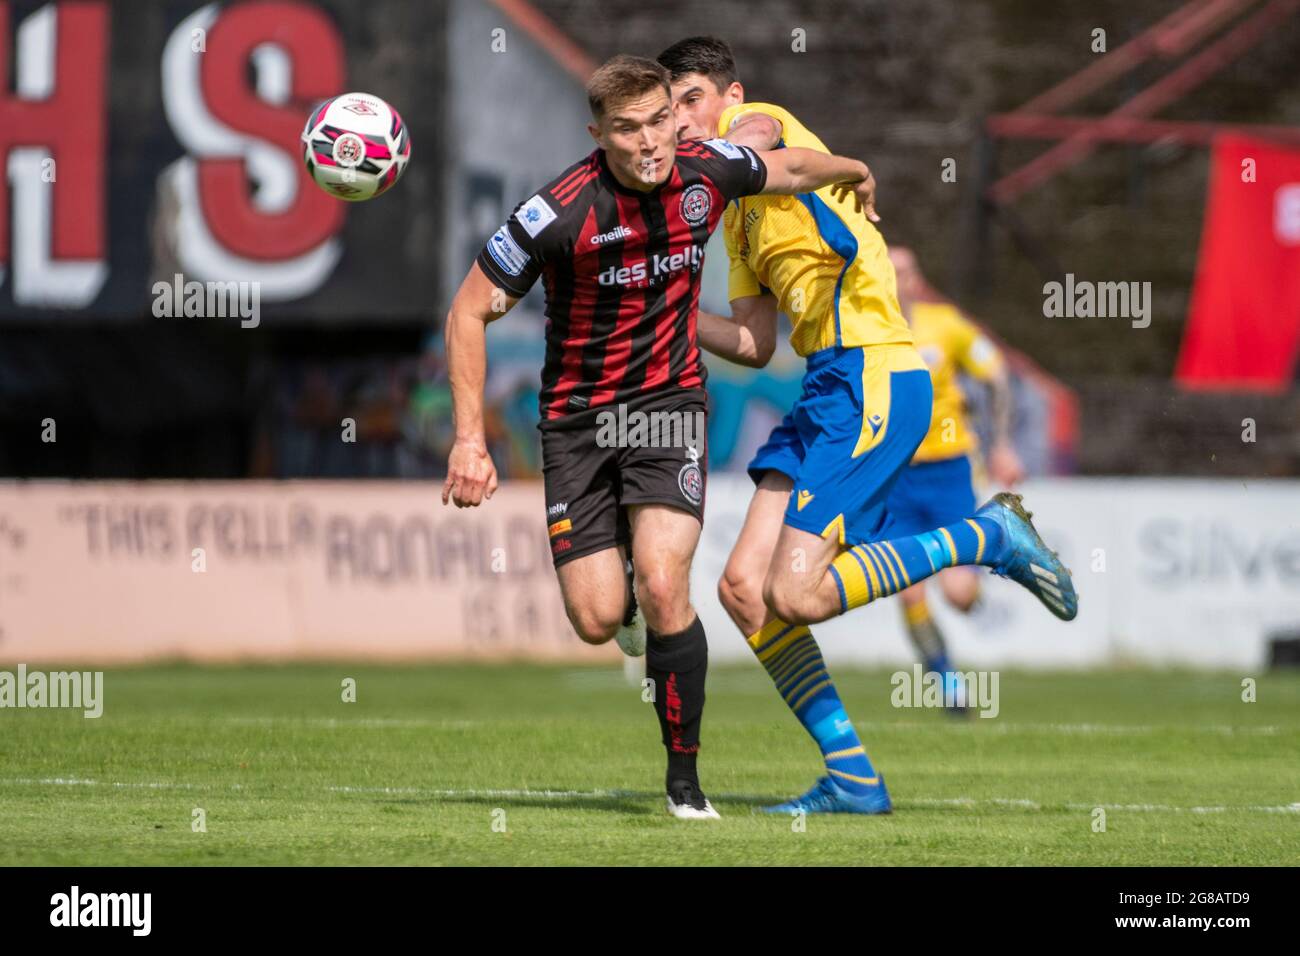 Dublin, Ireland. 18th July, 2021. Robert Manley of Longford and Anthony Breslin of Bohemians fight for the ball during the SSE Airtricity Premier Division match between Bohemians FC and Longford Town at the Dalymount Park in Dublin, Ireland on July 18, 2021 (Photo by Andrew SURMA/SIPA USA). Credit: Sipa USA/Alamy Live News Stock Photo